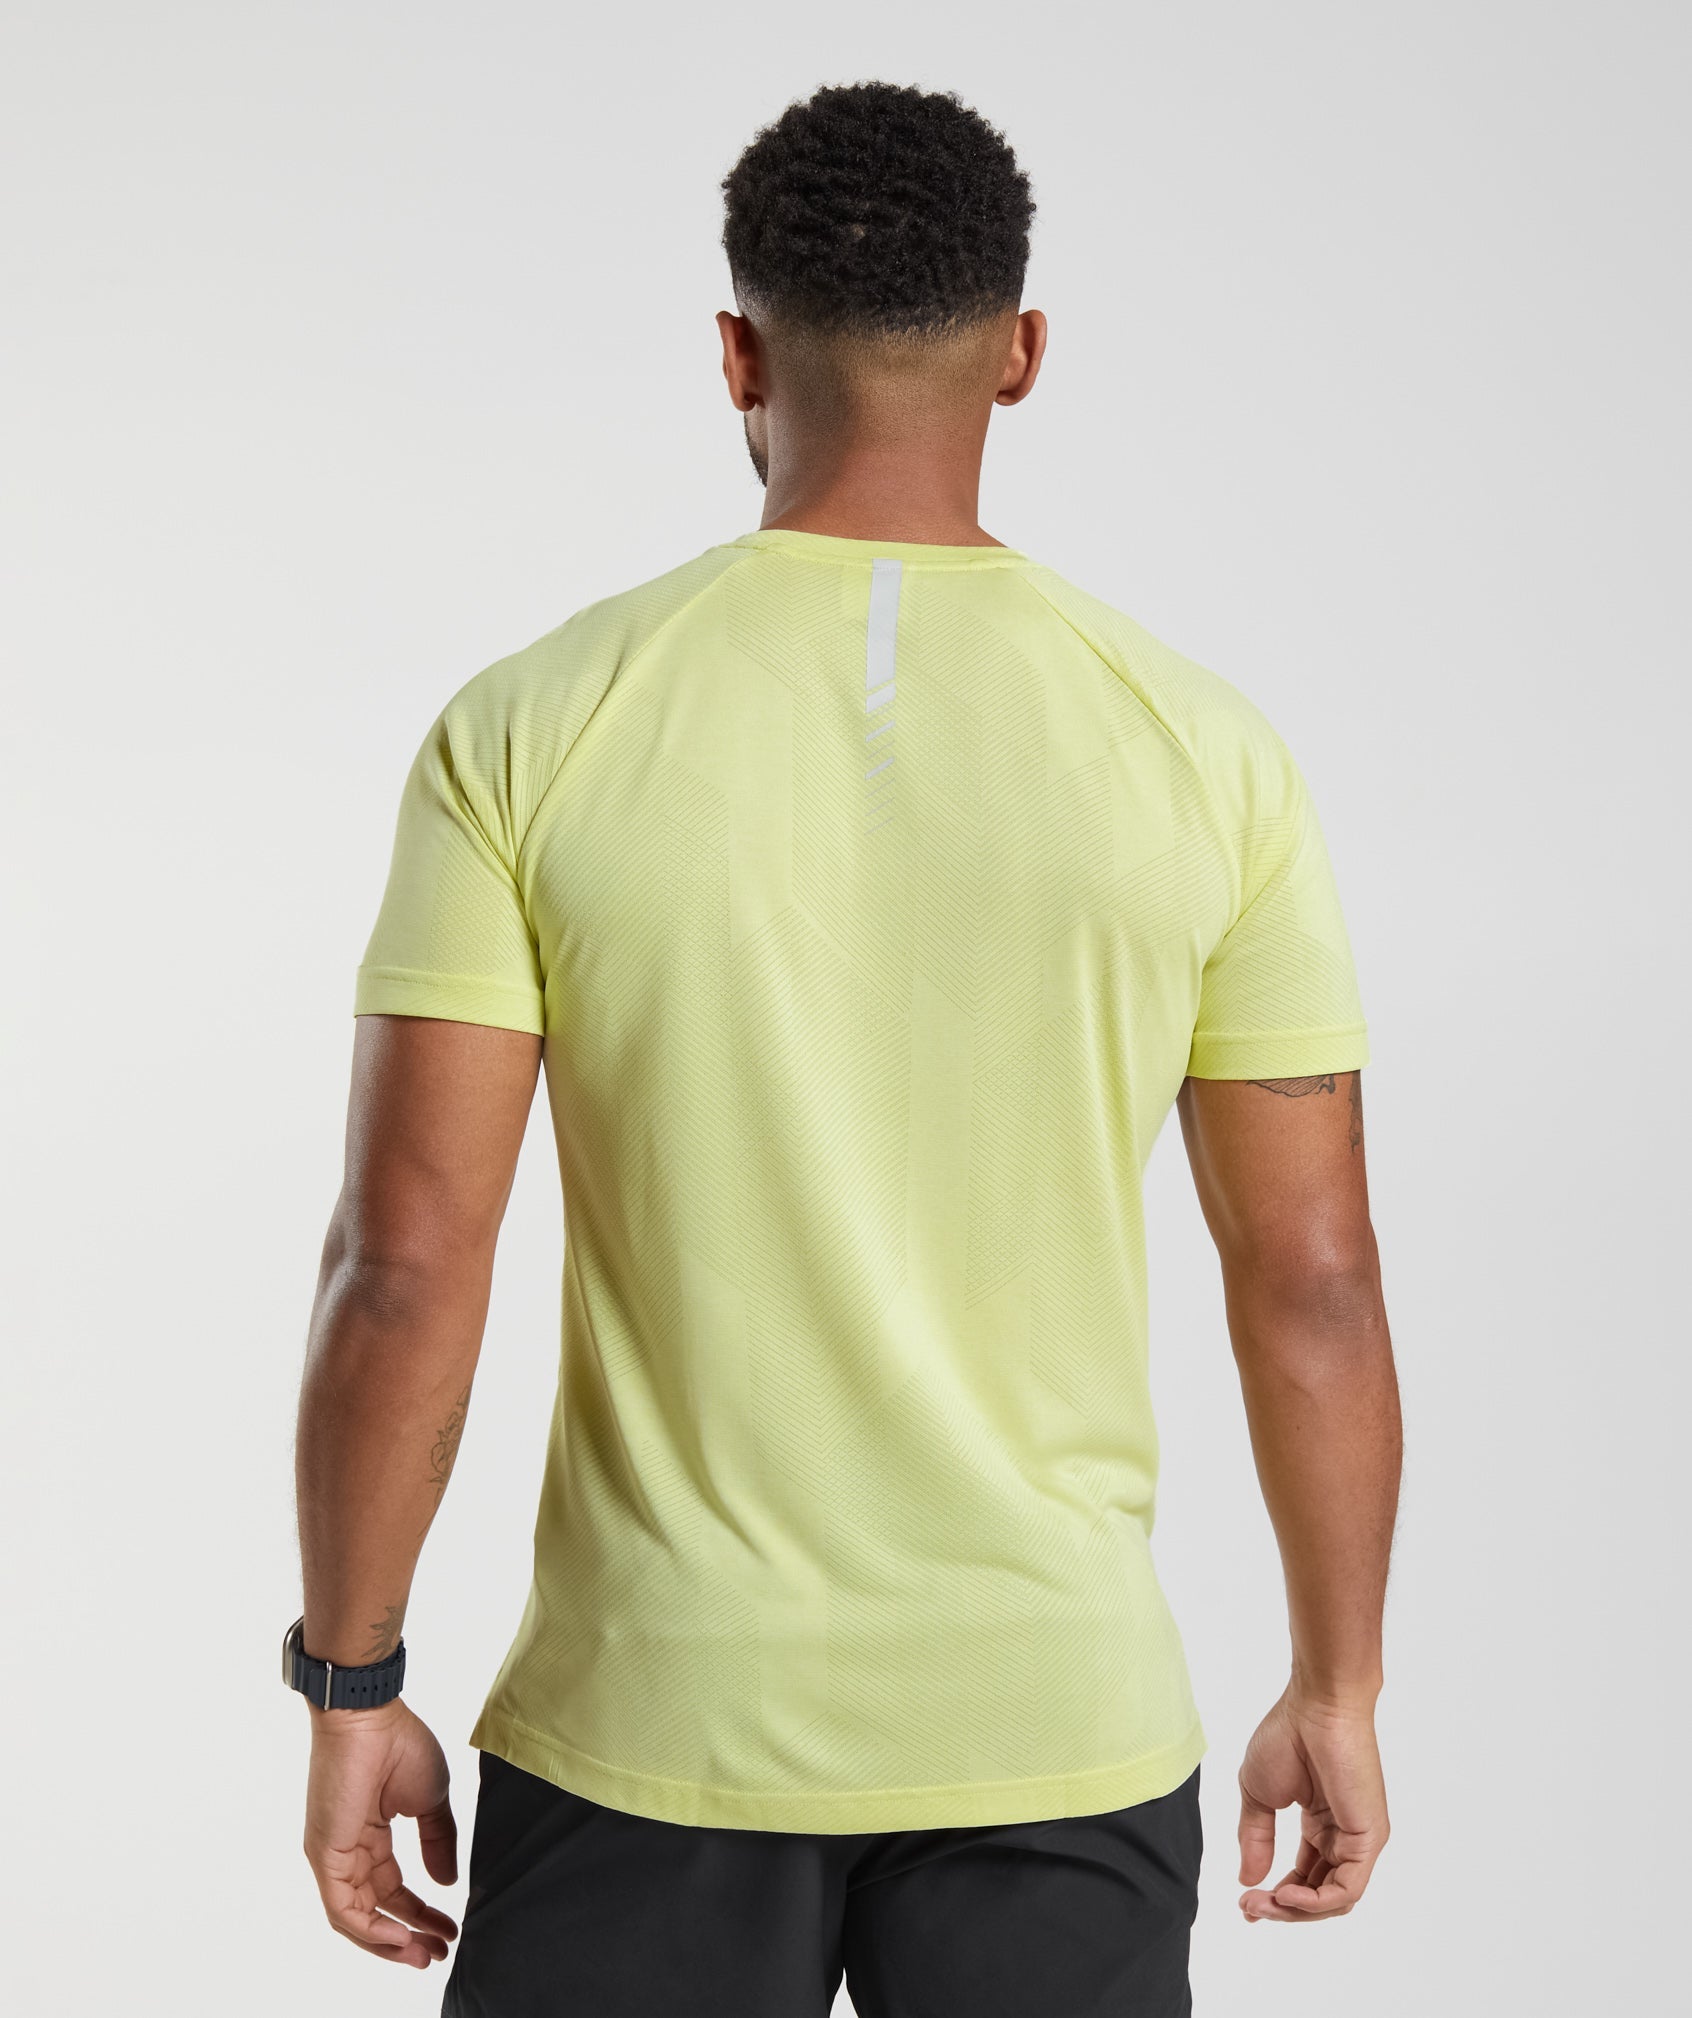 Apex T-Shirt in Firefly Green/White